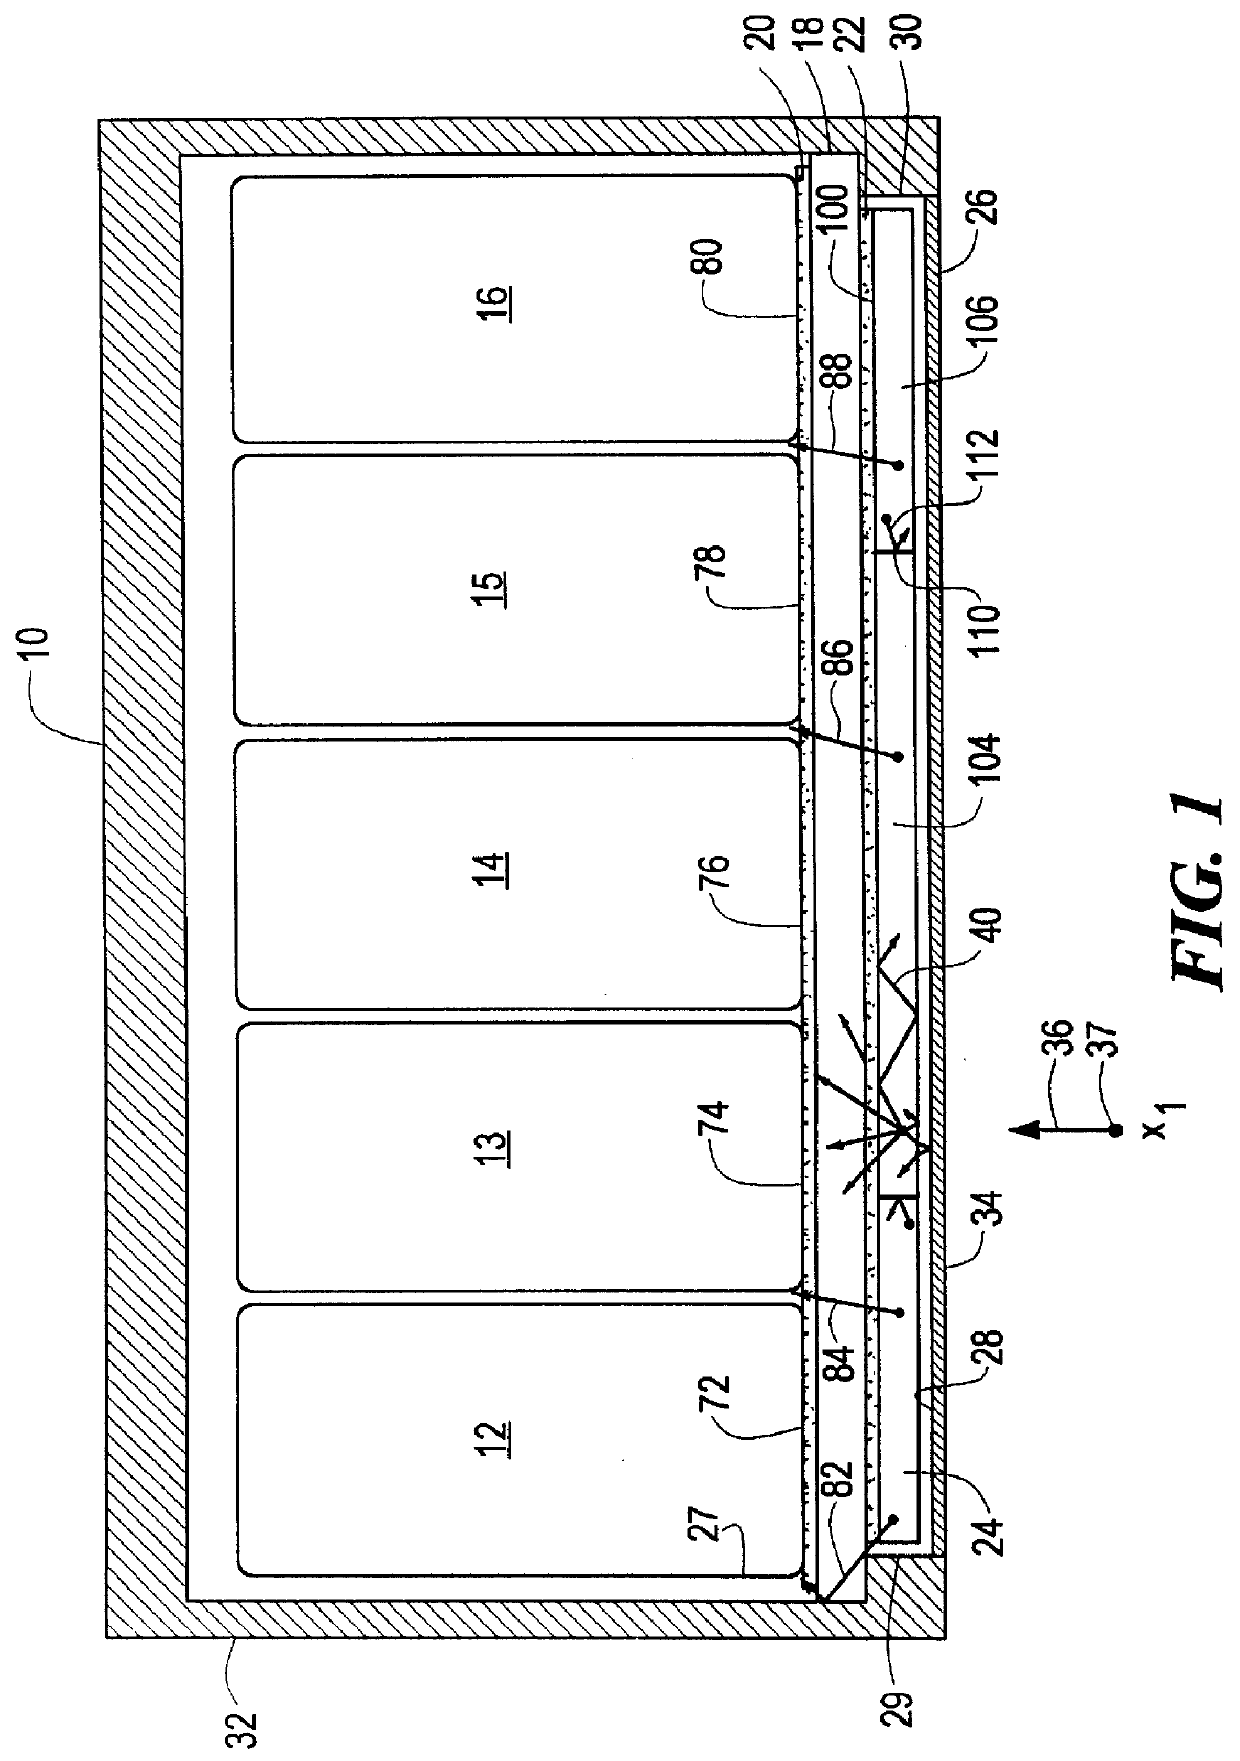 Scintillation camera with improved scintillation material segment interfaces